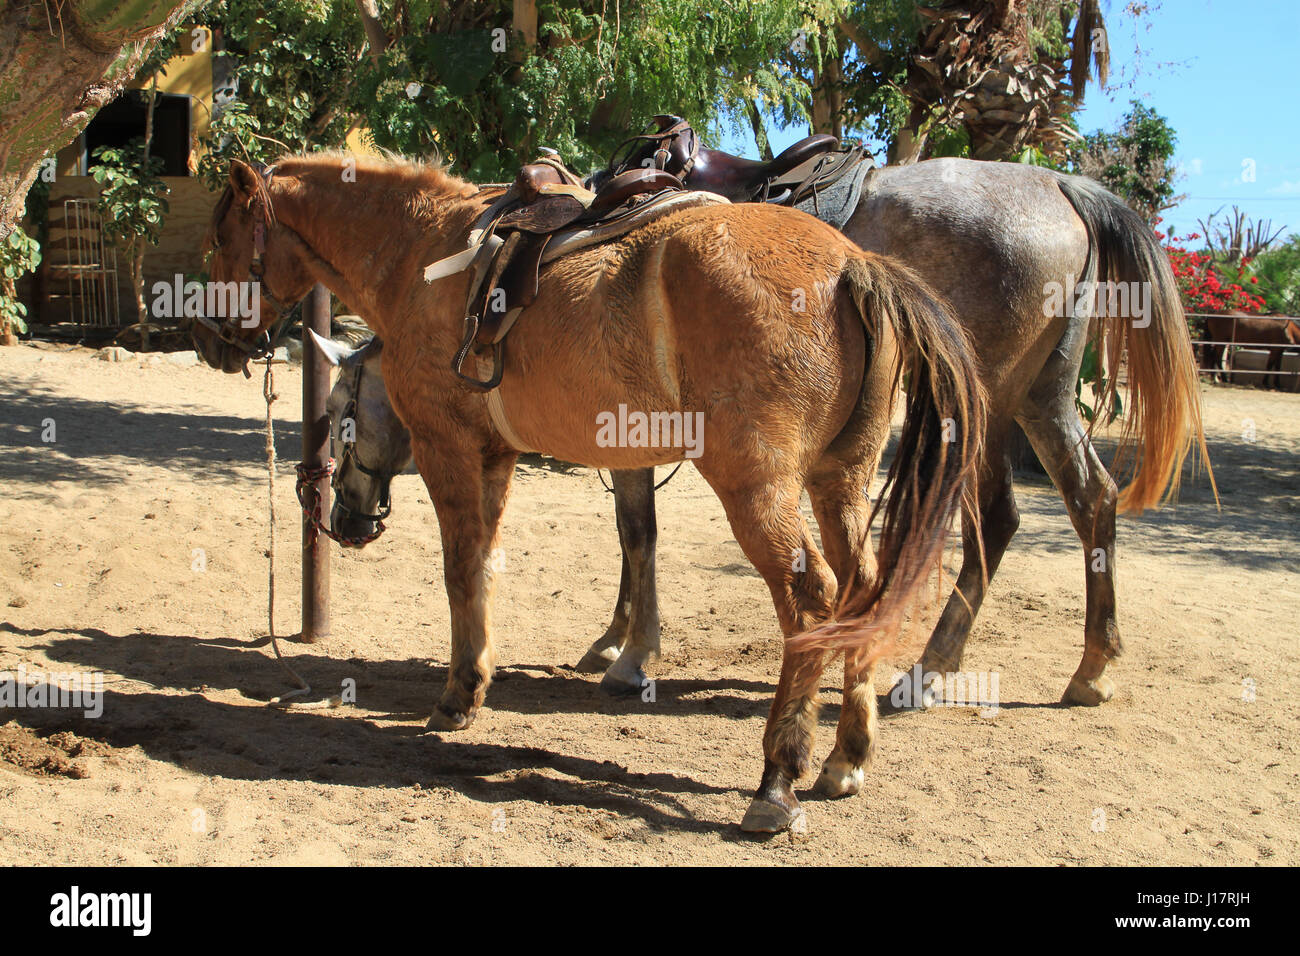 Two riding horses one is ground tied, the other tied to a rail.  Brown horse. Dappled grey horse. Standing close together waiting for riders Stock Photo